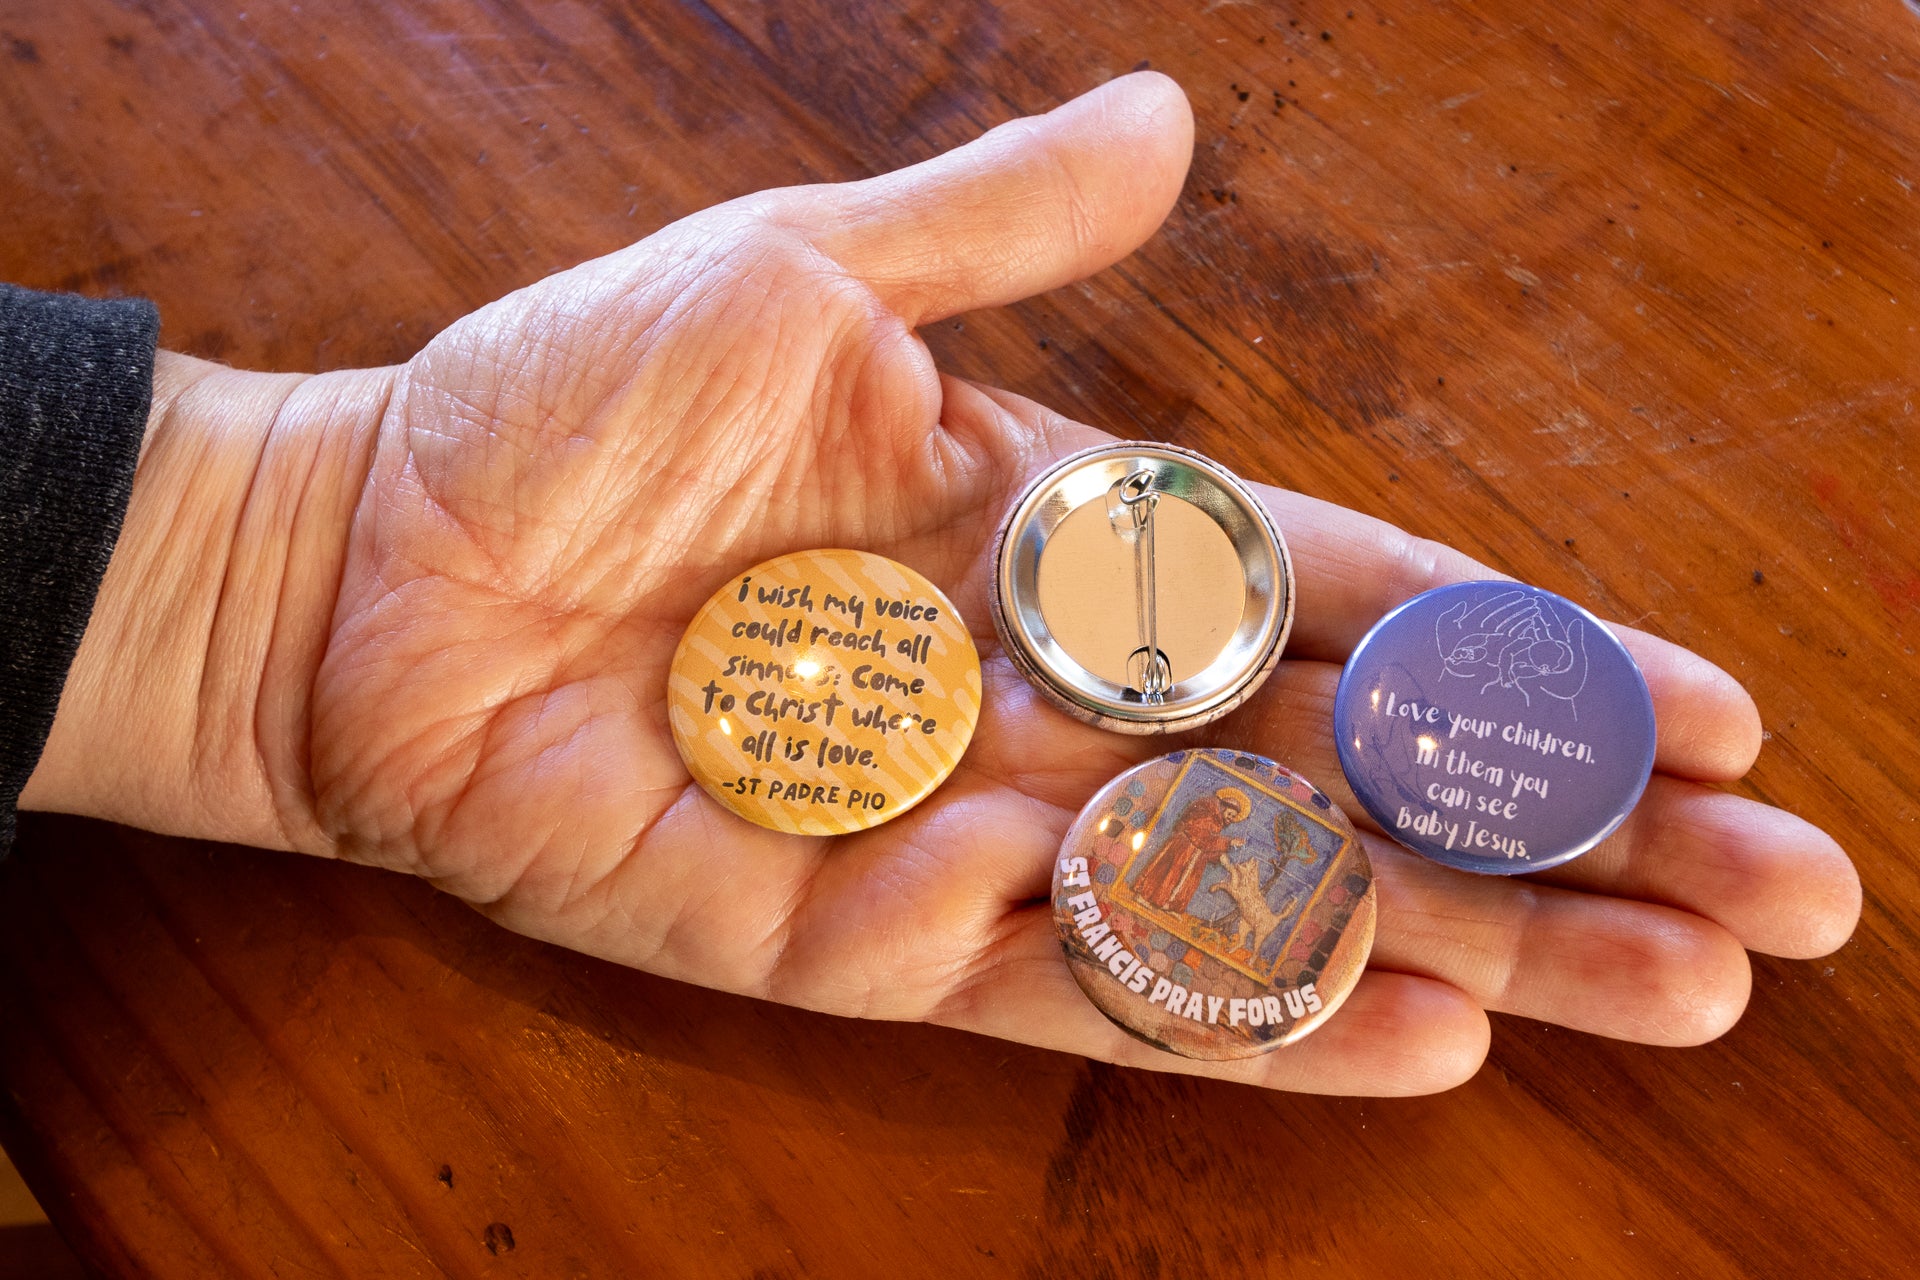 St Catherine of Sienna Button Who God Meant you to Be